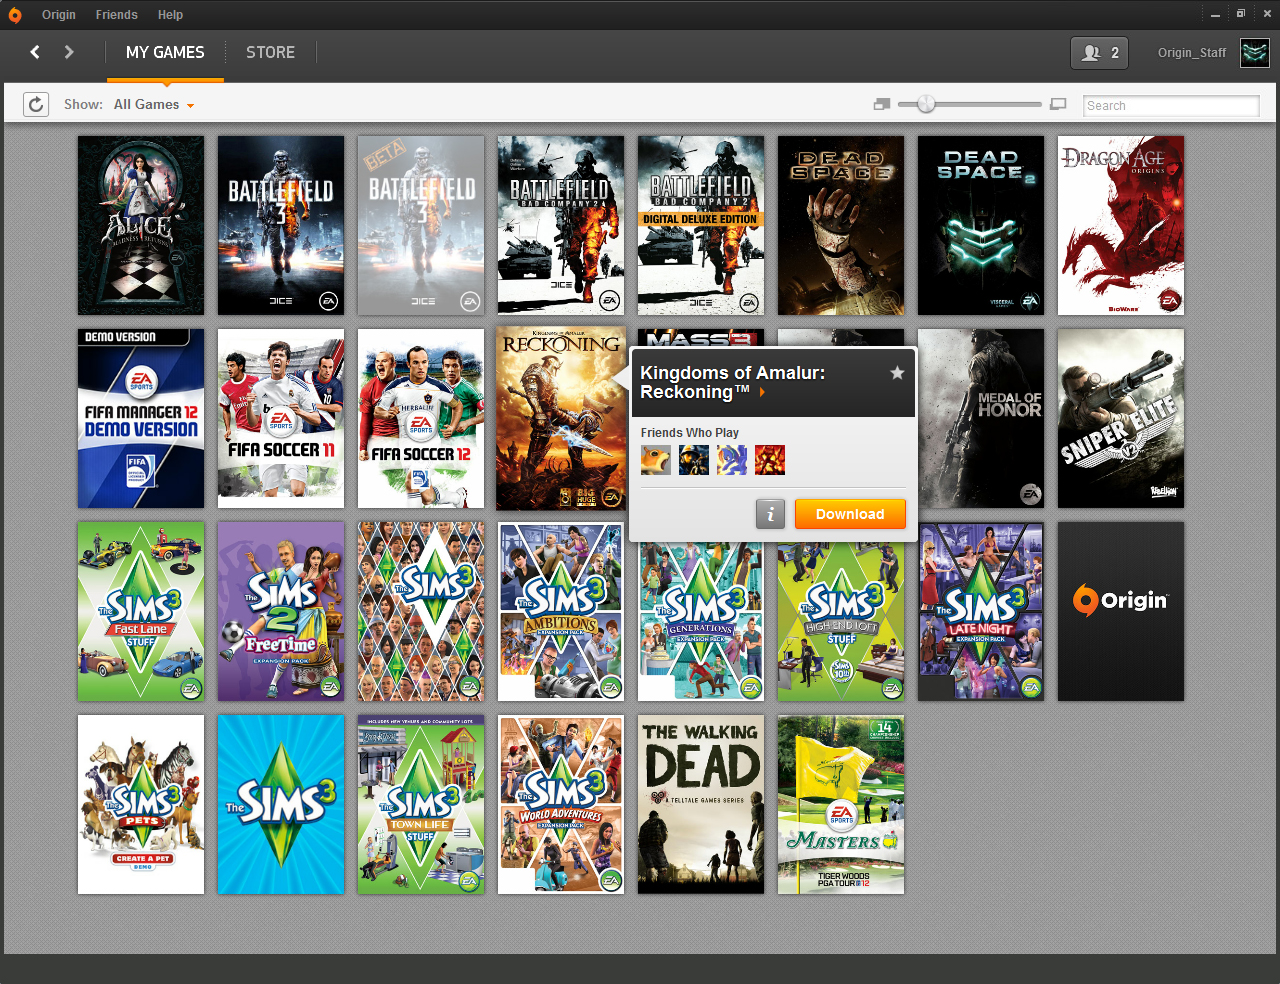 Where would origin save a download game on my pc free